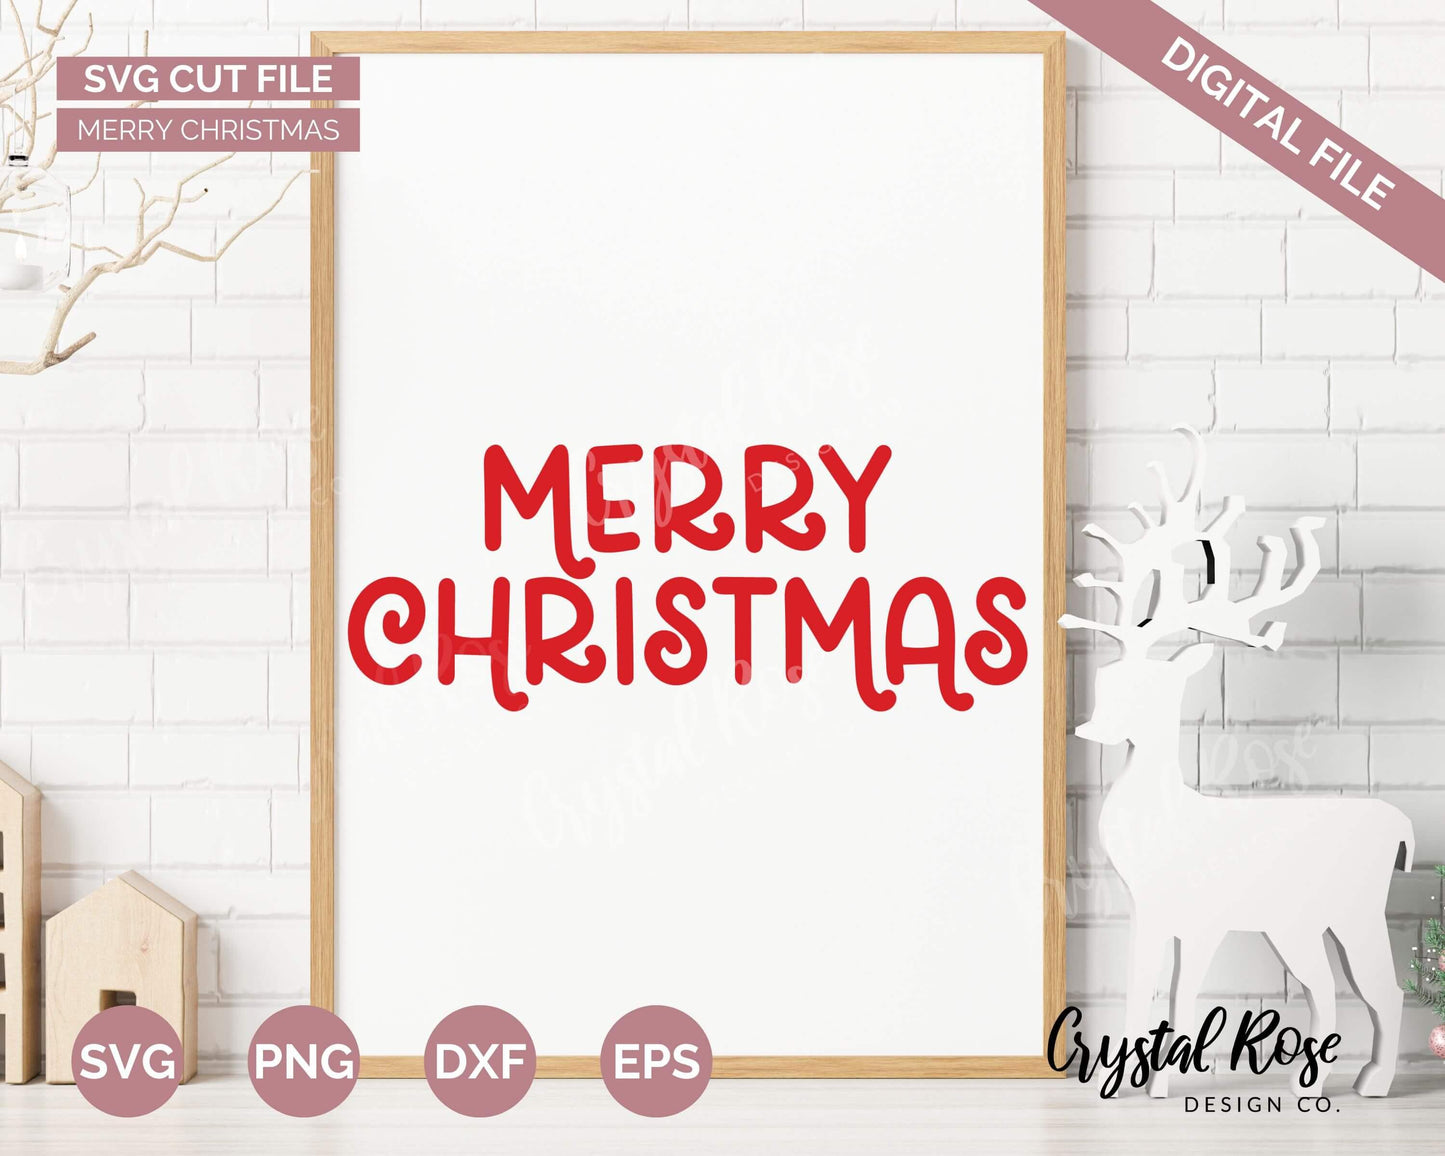 Merry Christmas SVG, Christmas SVG, Digital Download, Cricut, Silhouette, Glowforge (includes svg/png/dxf/eps)